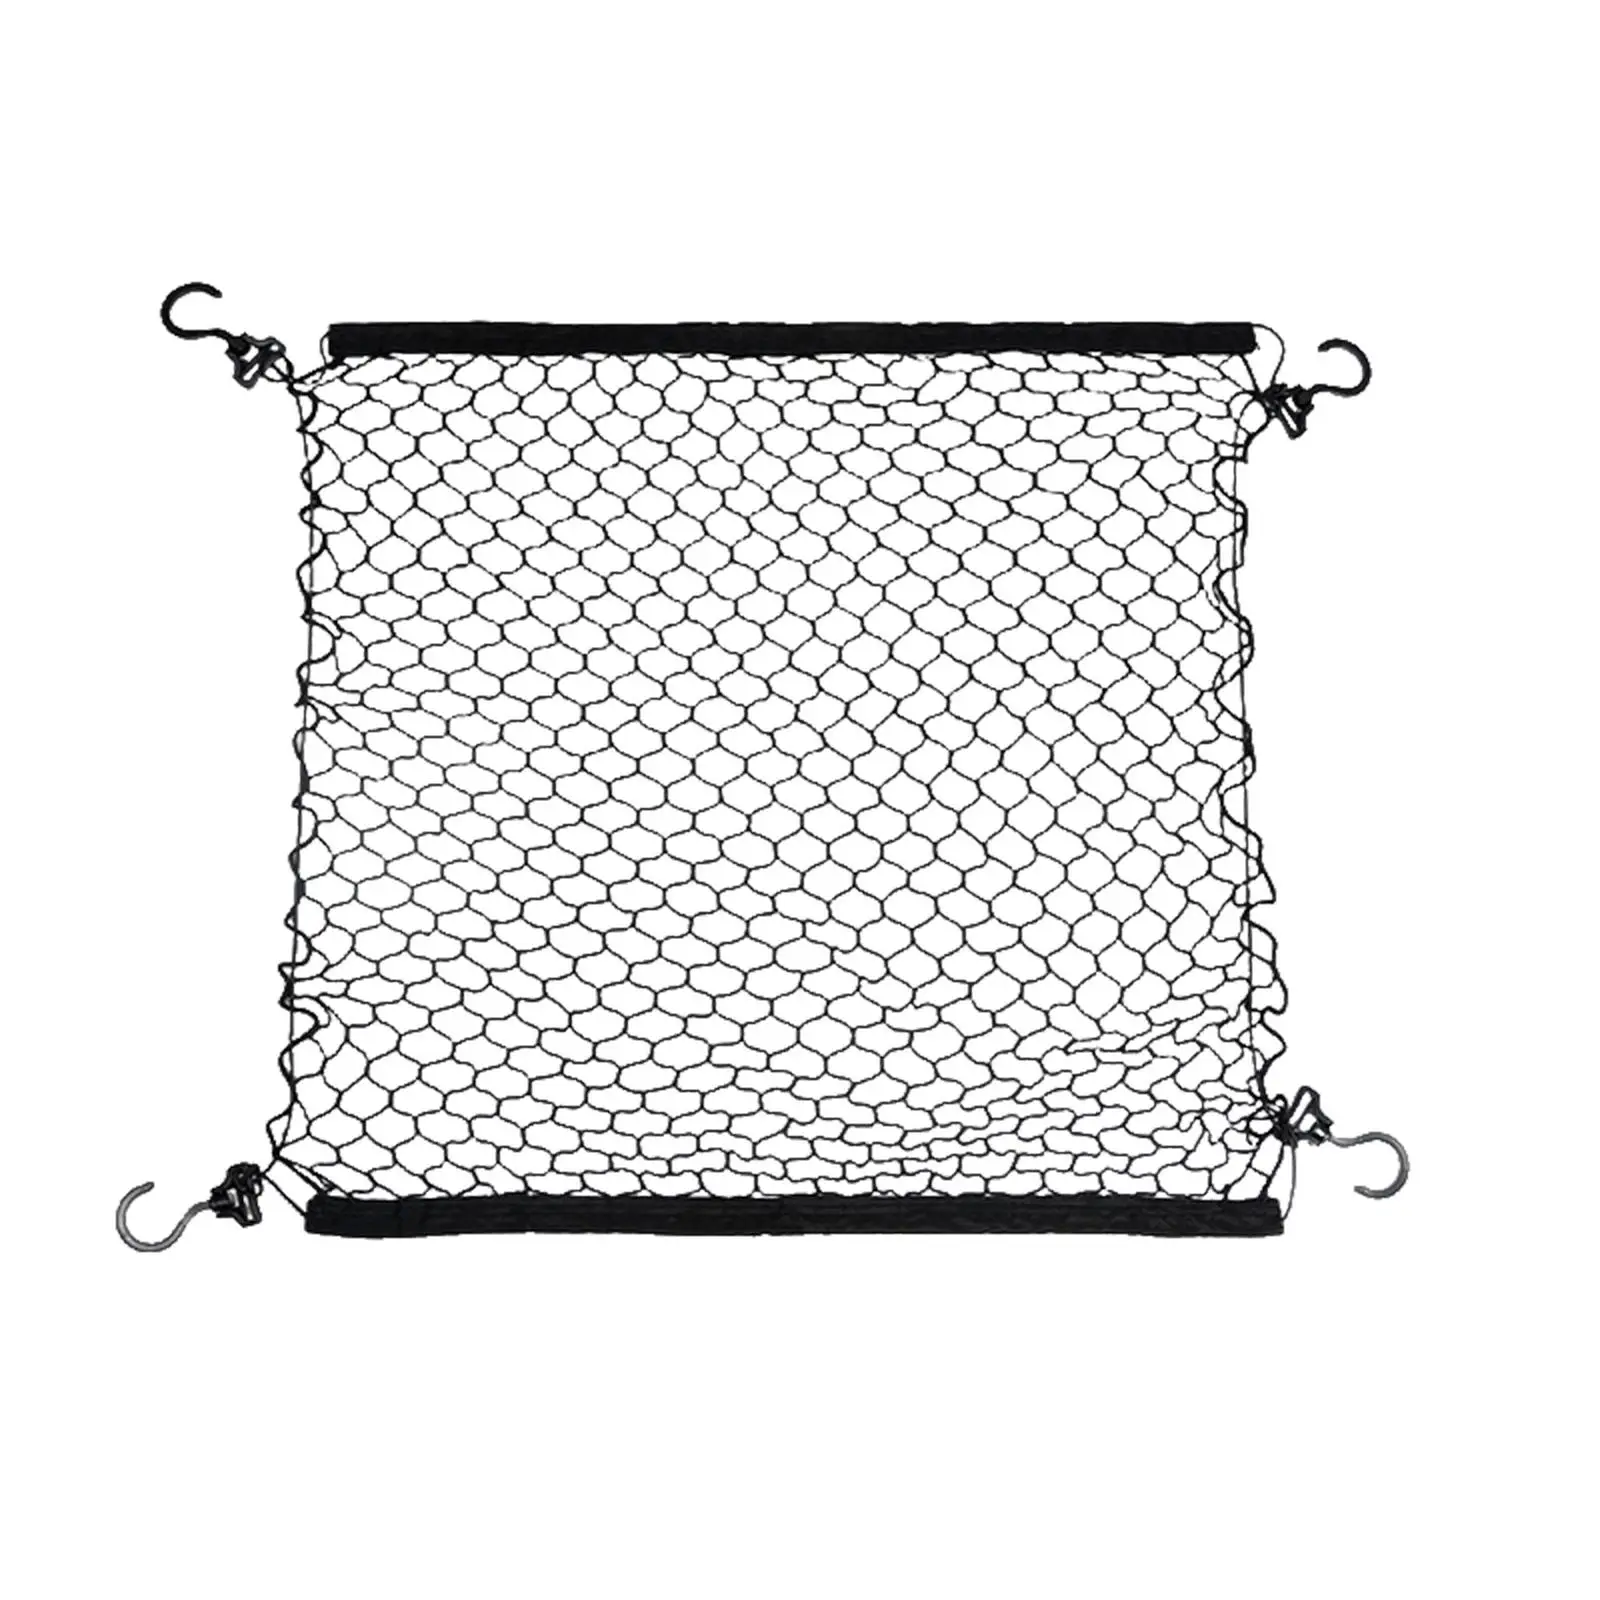 Truck Bed Cargo Net Car Pickup Truck with Hooks Trip Mesh Netting Organizer Home for Hiking Garden Motorcycle Yard Roof Rack